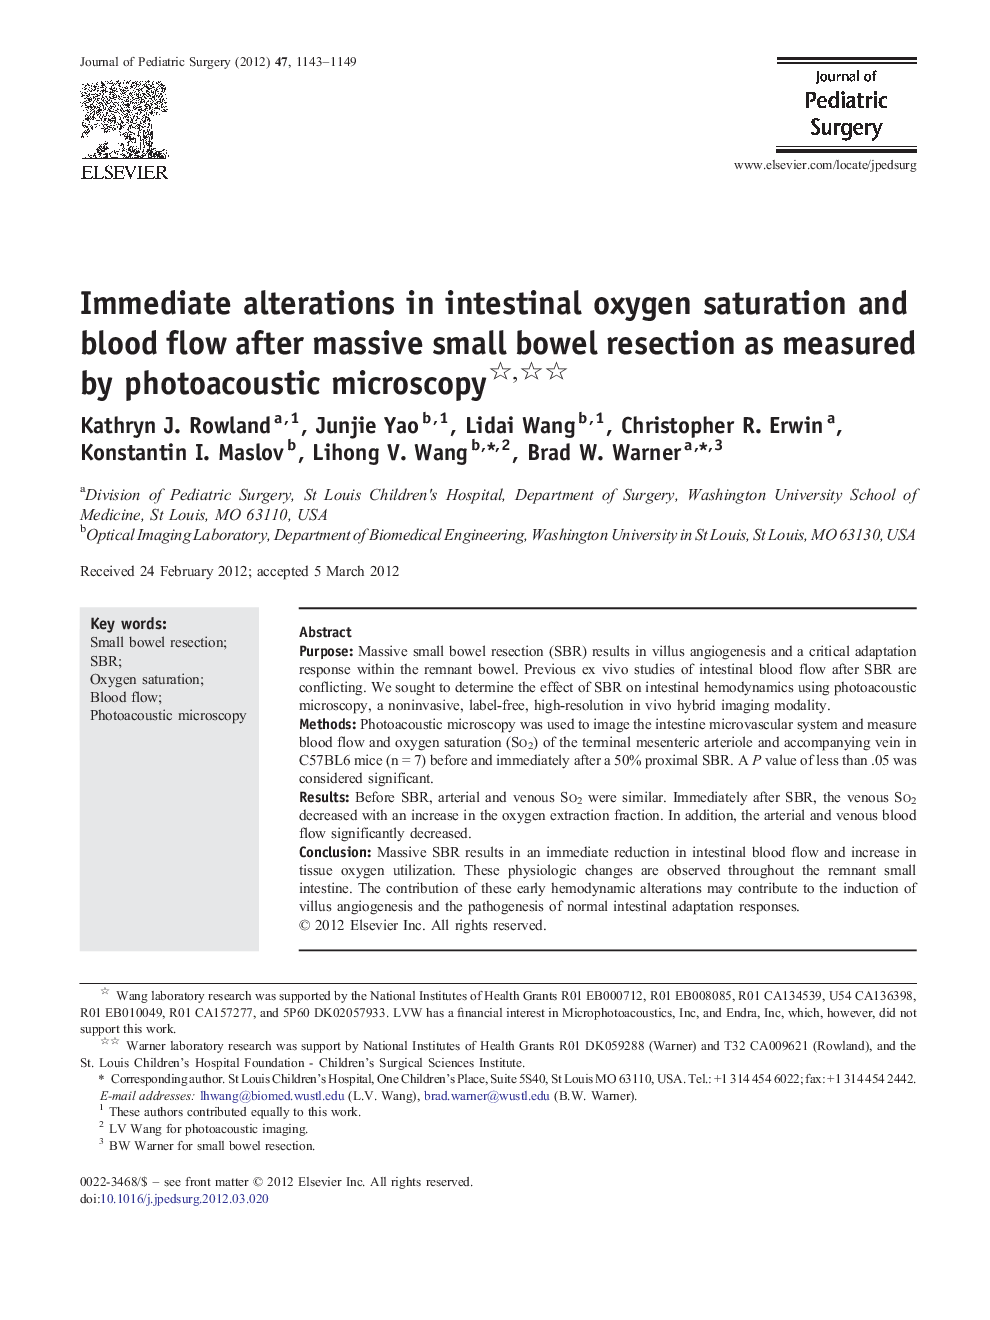 Immediate alterations in intestinal oxygen saturation and blood flow after massive small bowel resection as measured by photoacoustic microscopy 